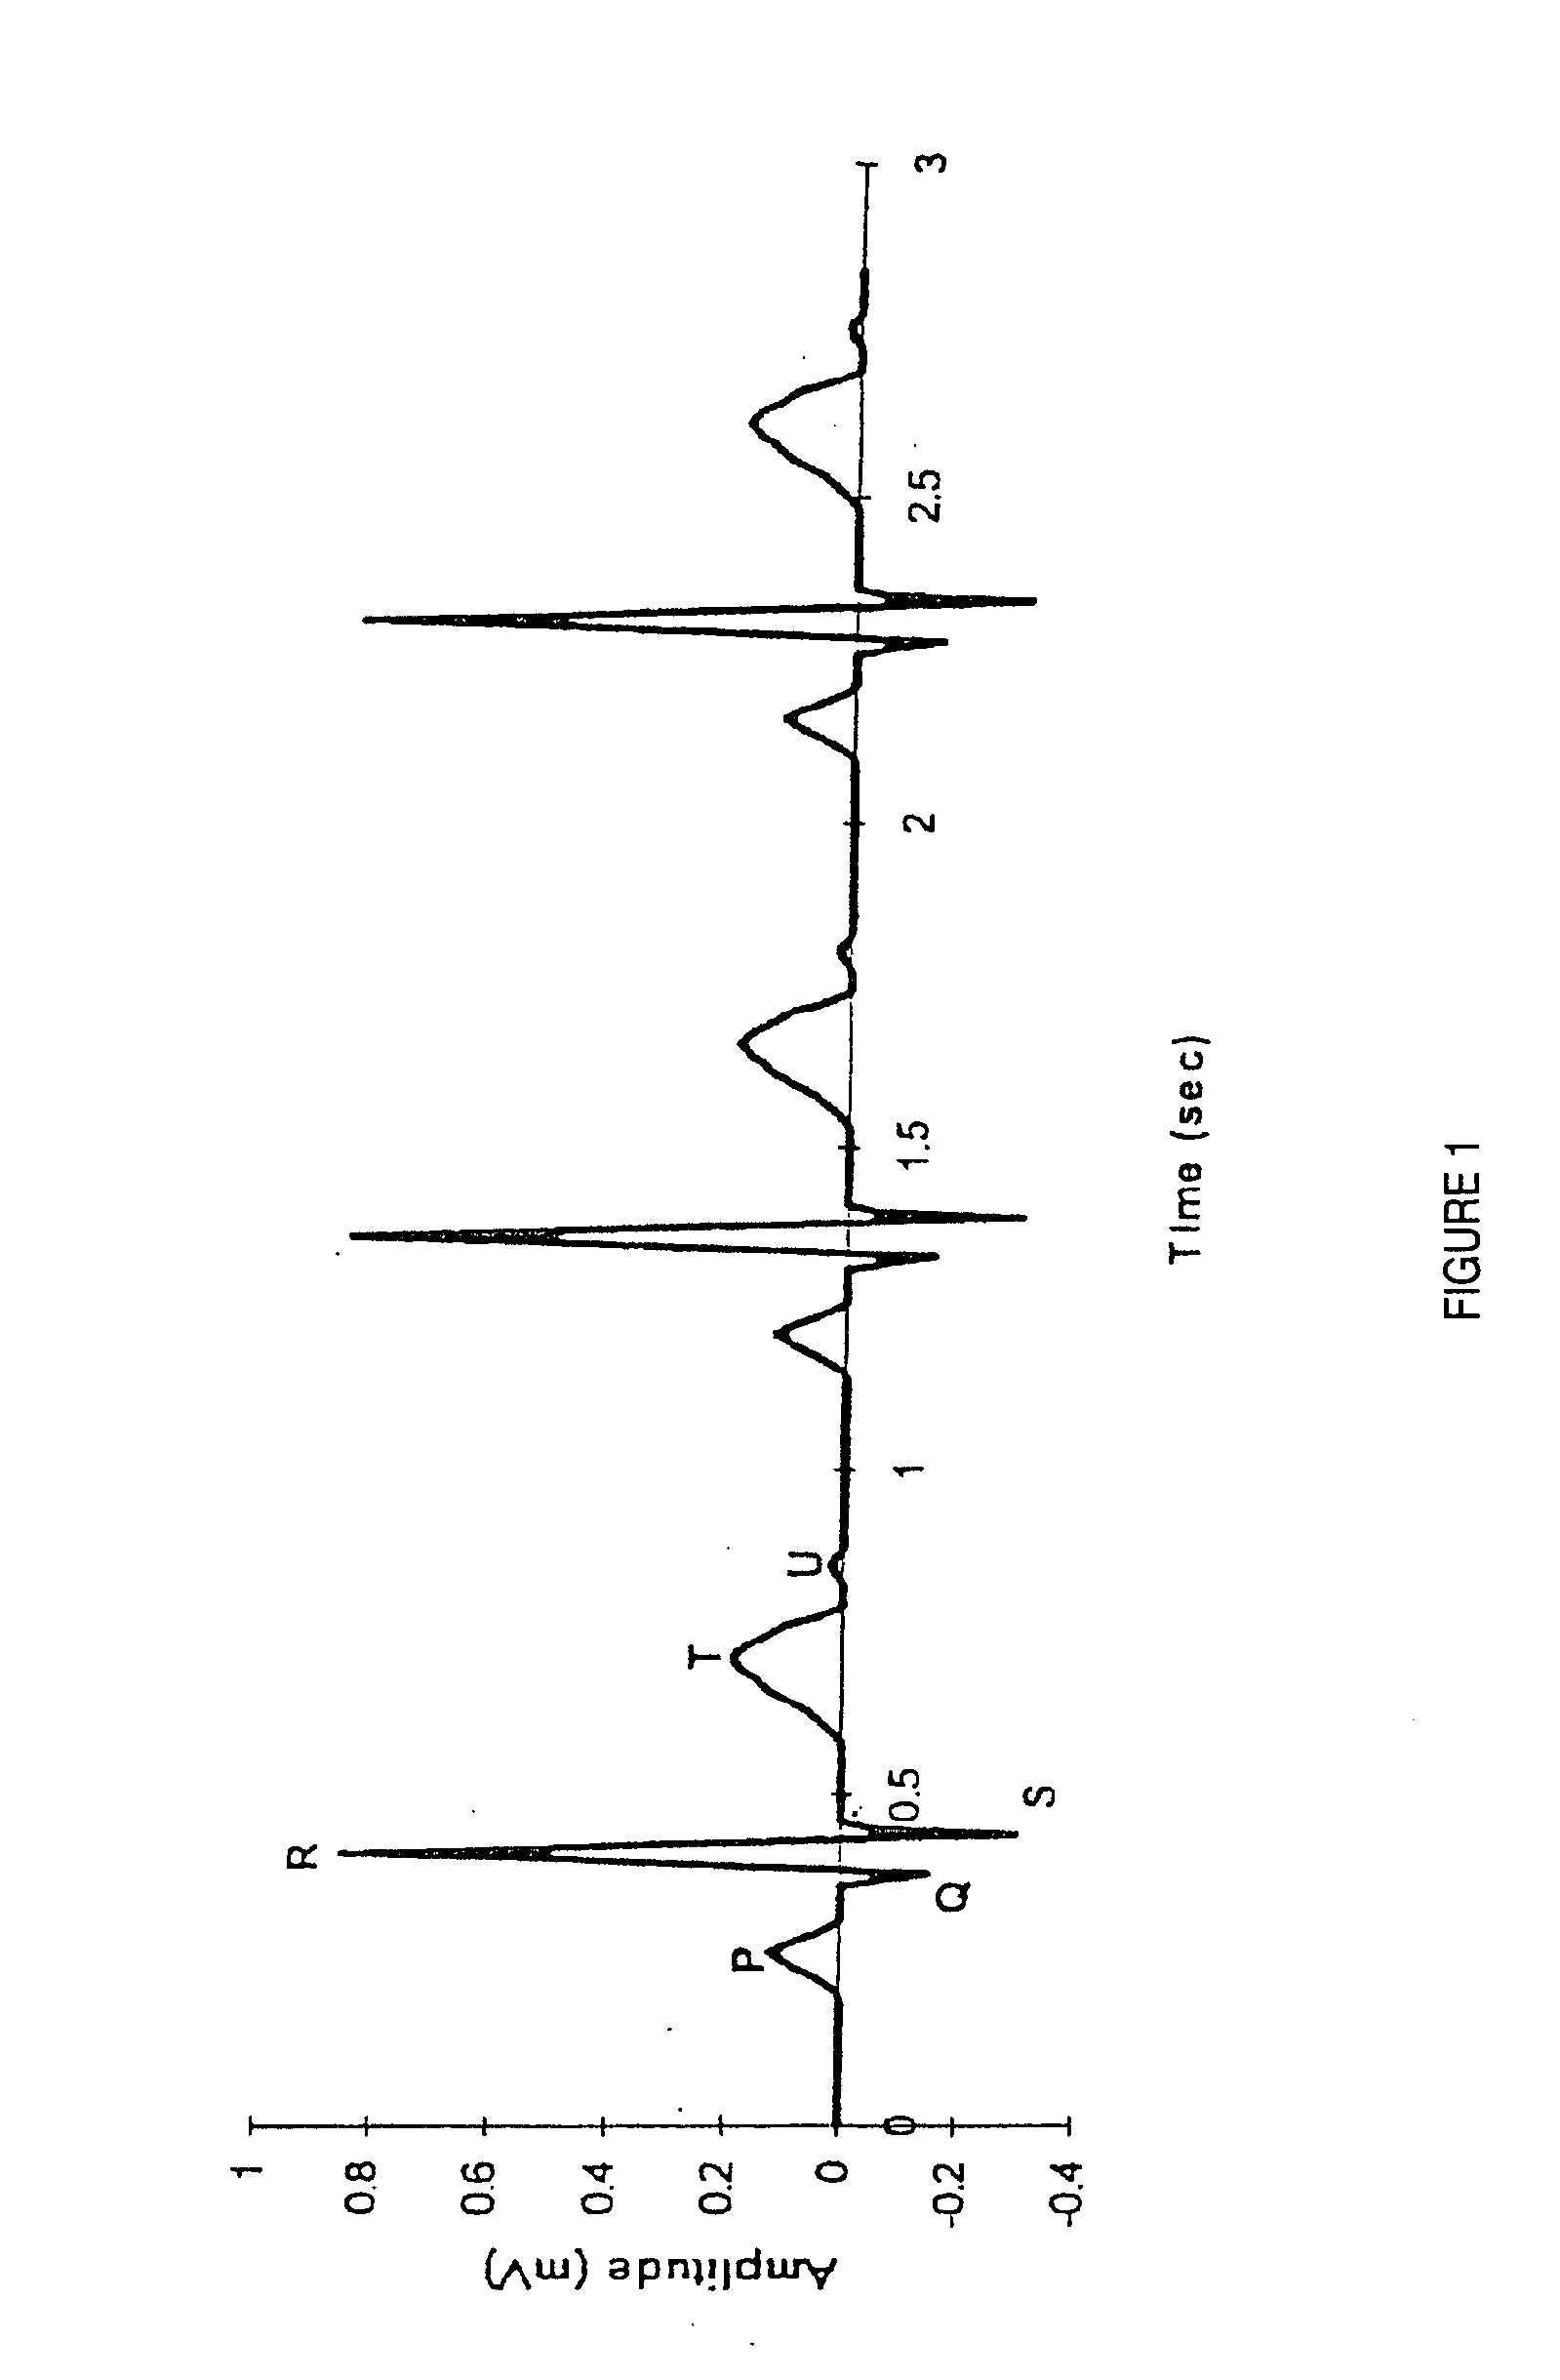 Method and system for processing electrocardial signals